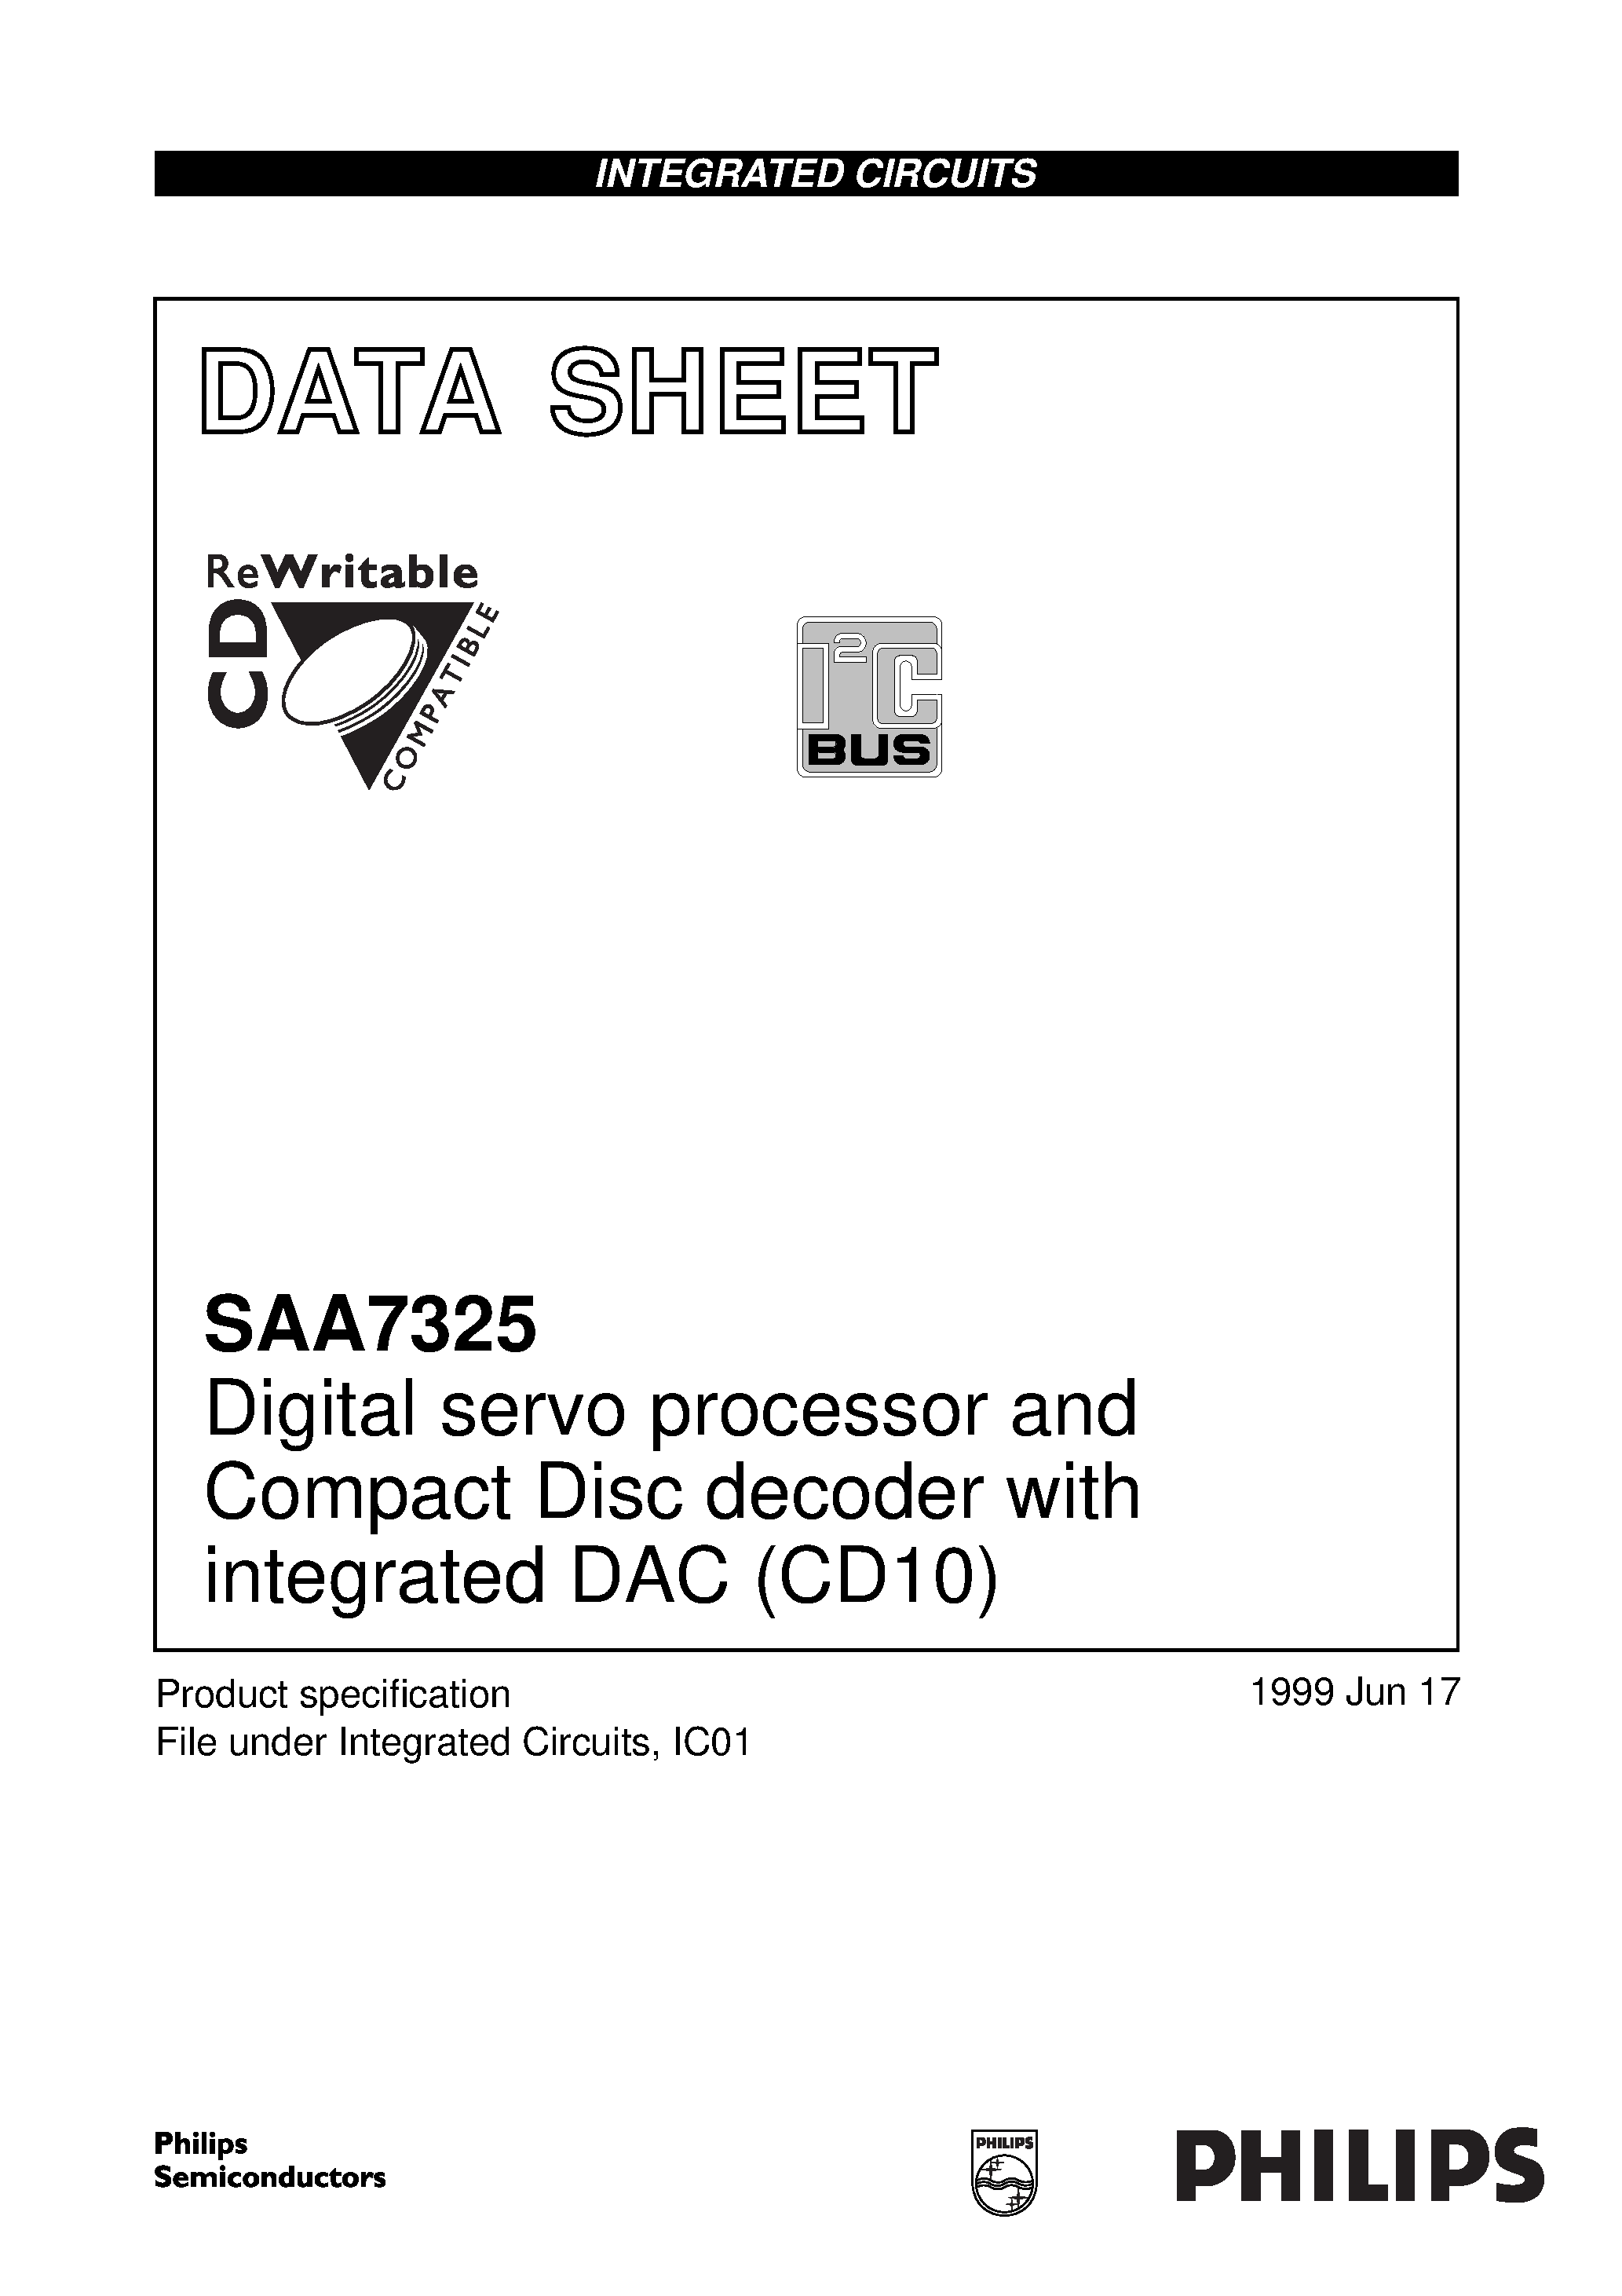 Datasheet SAA7325H - Digital servo processor and Compact Disc decoder with integrated DAC CD10 page 1